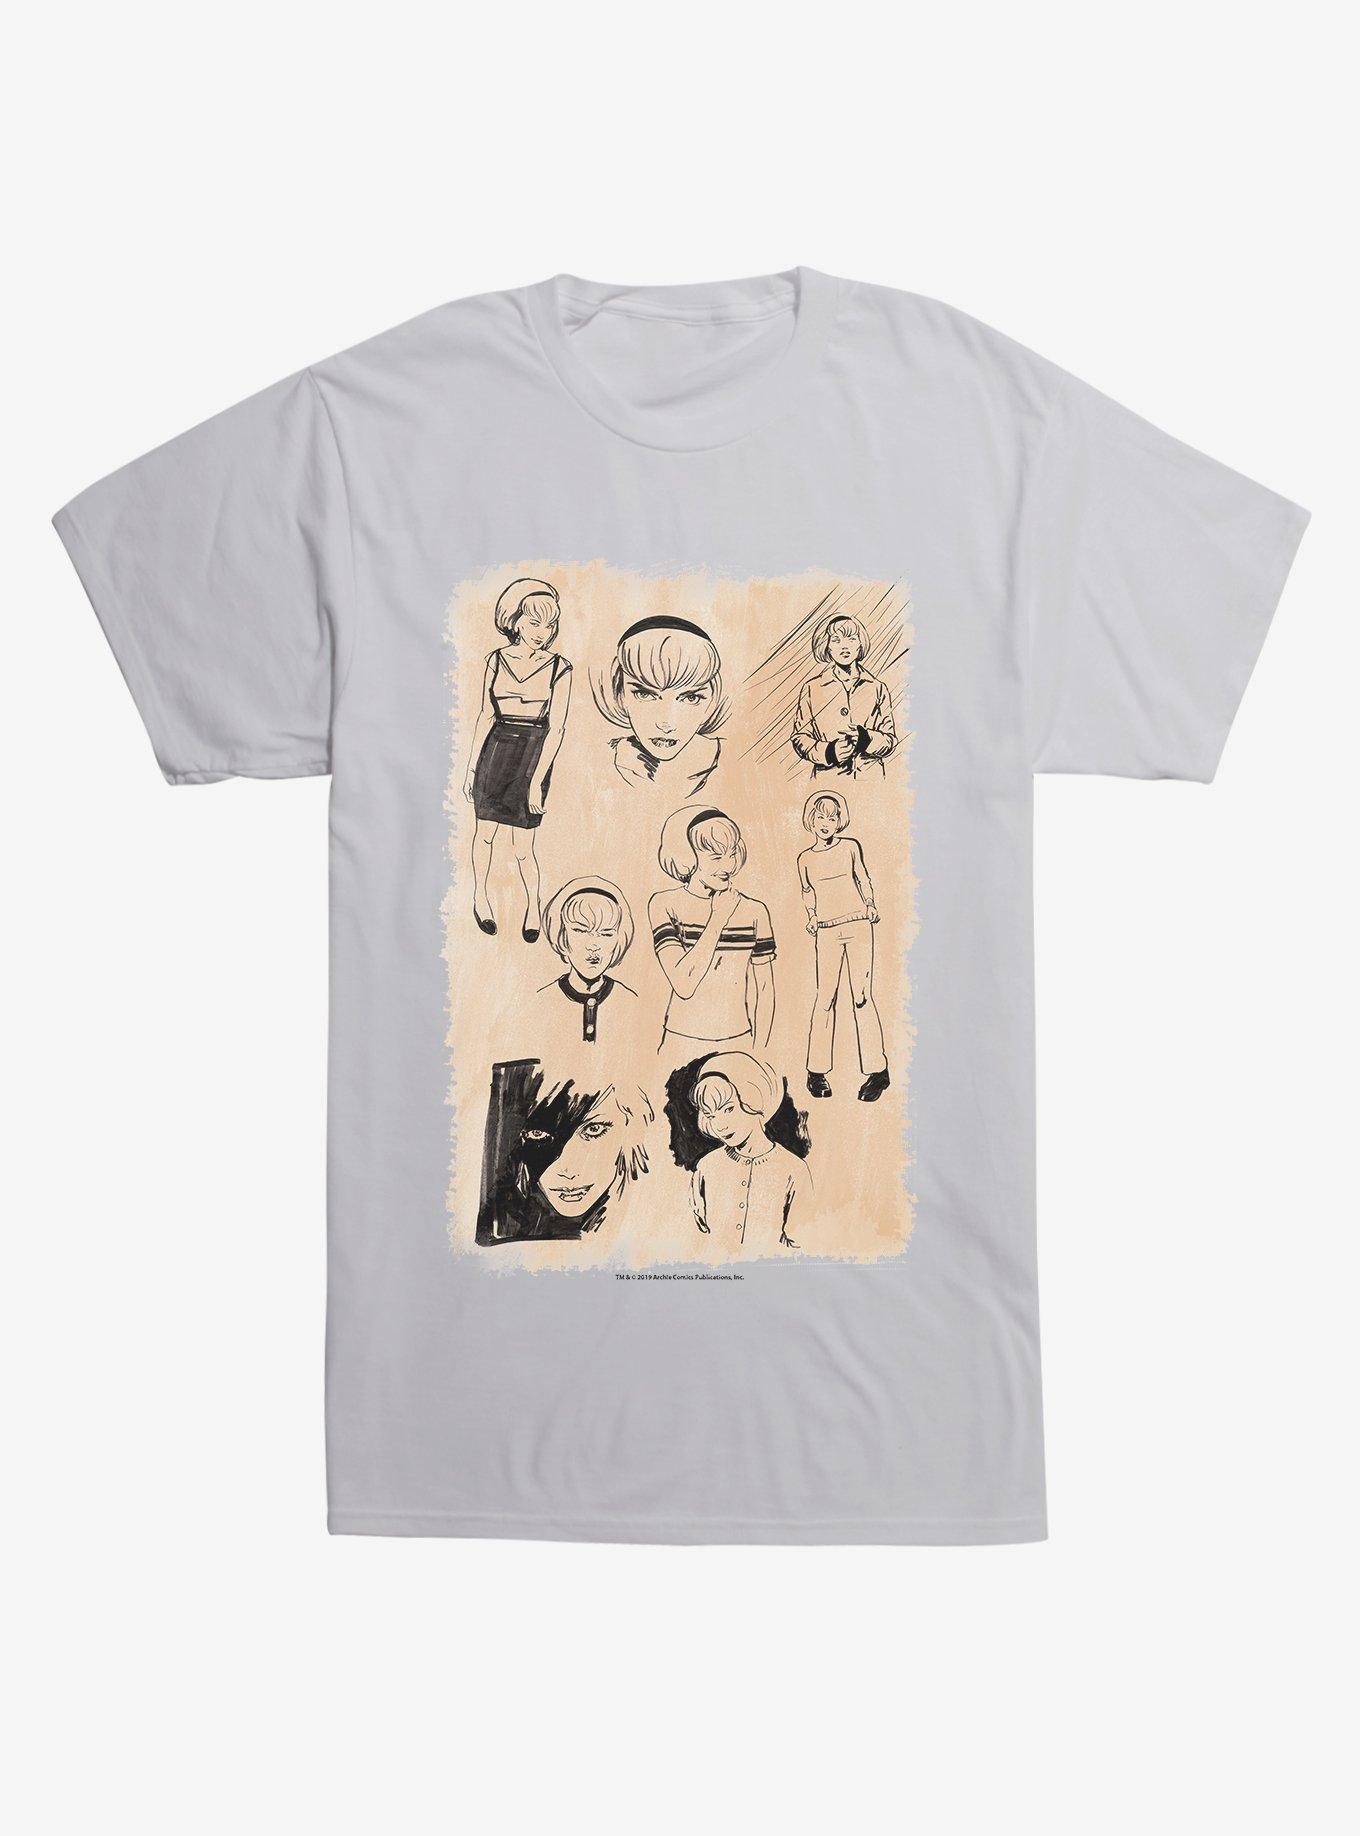 Chilling Adventures Of Sabrina Sketches White T-Shirt, , hi-res